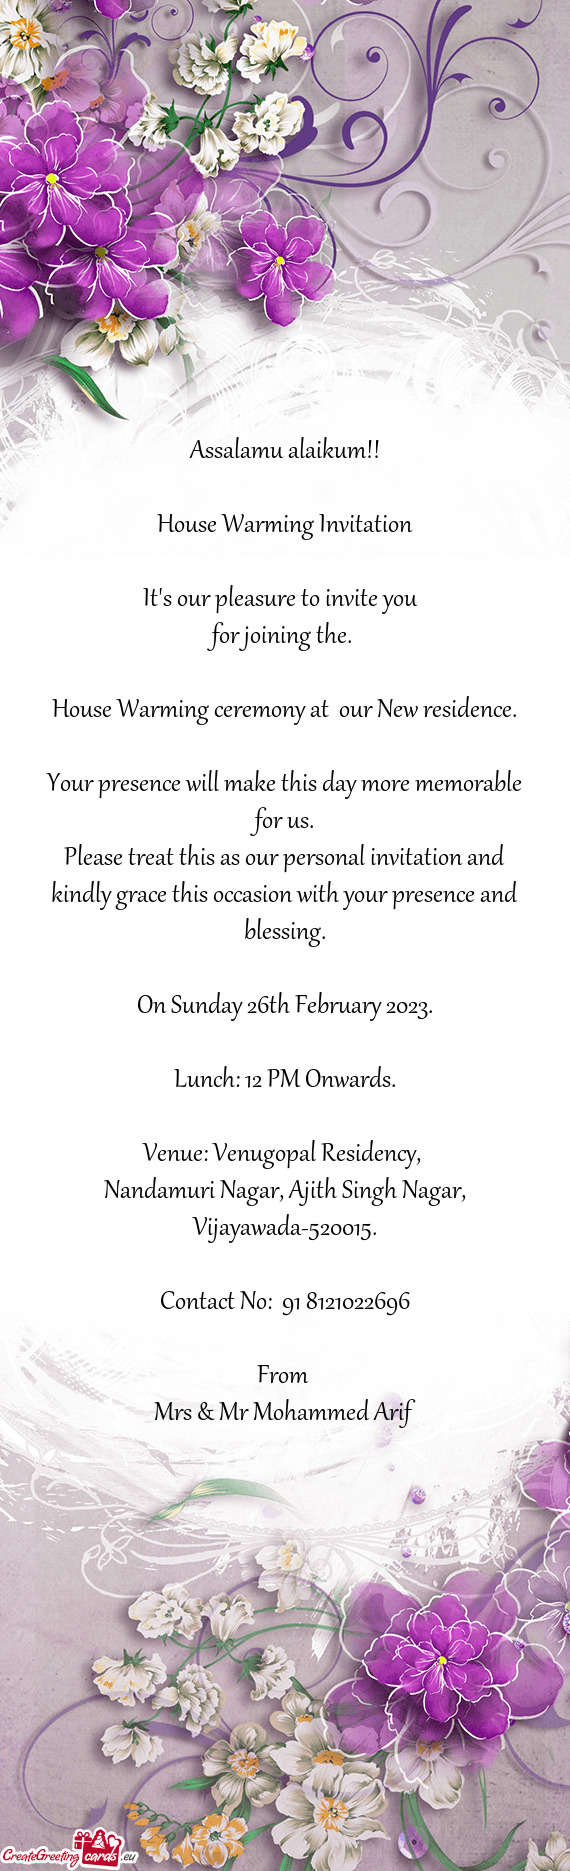 House Warming ceremony at our New residence